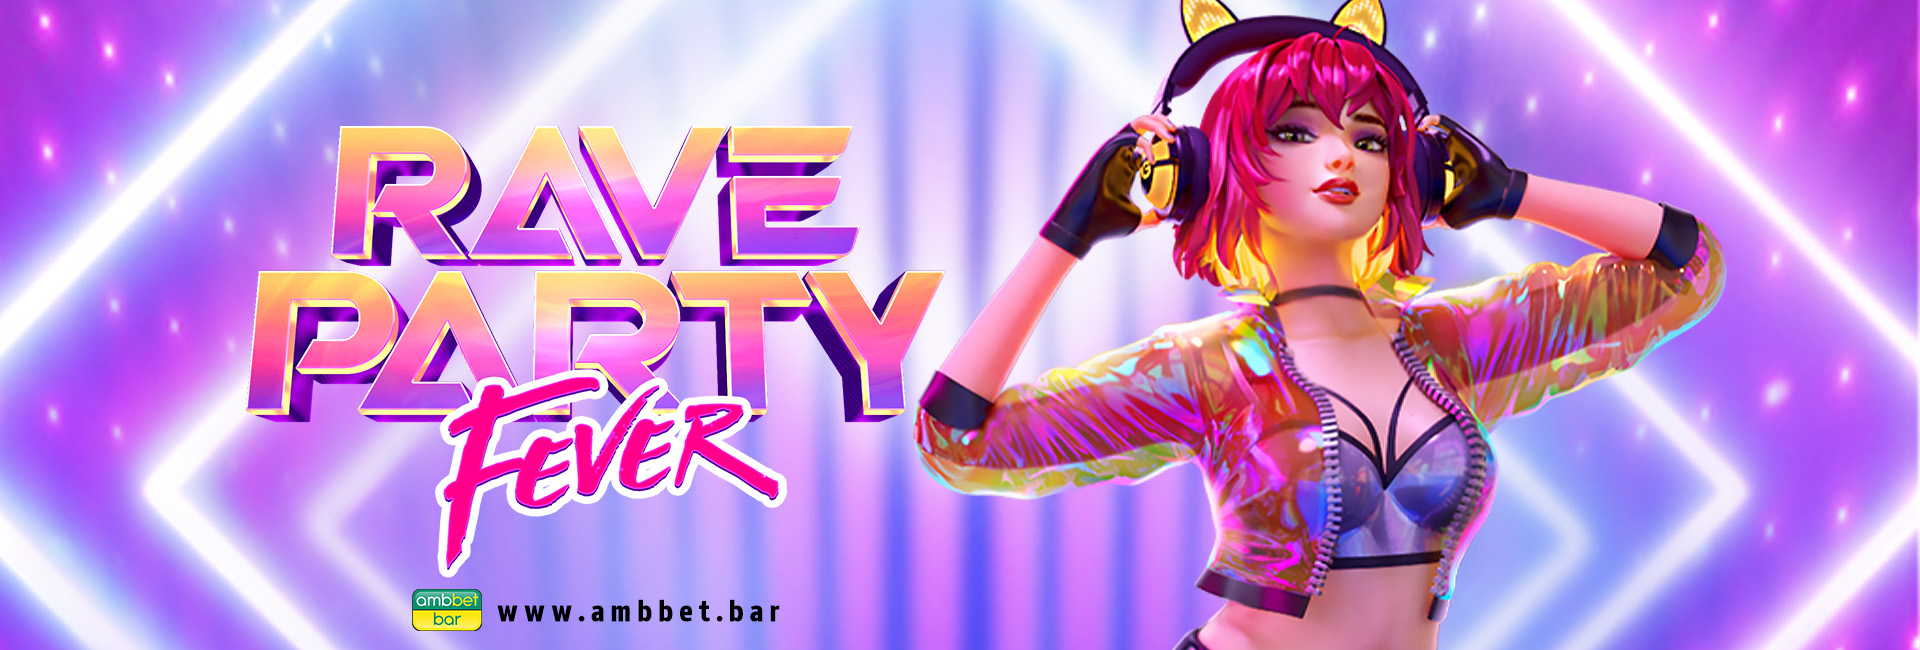 Rave Party Fever รีวิวเกมสล็อต